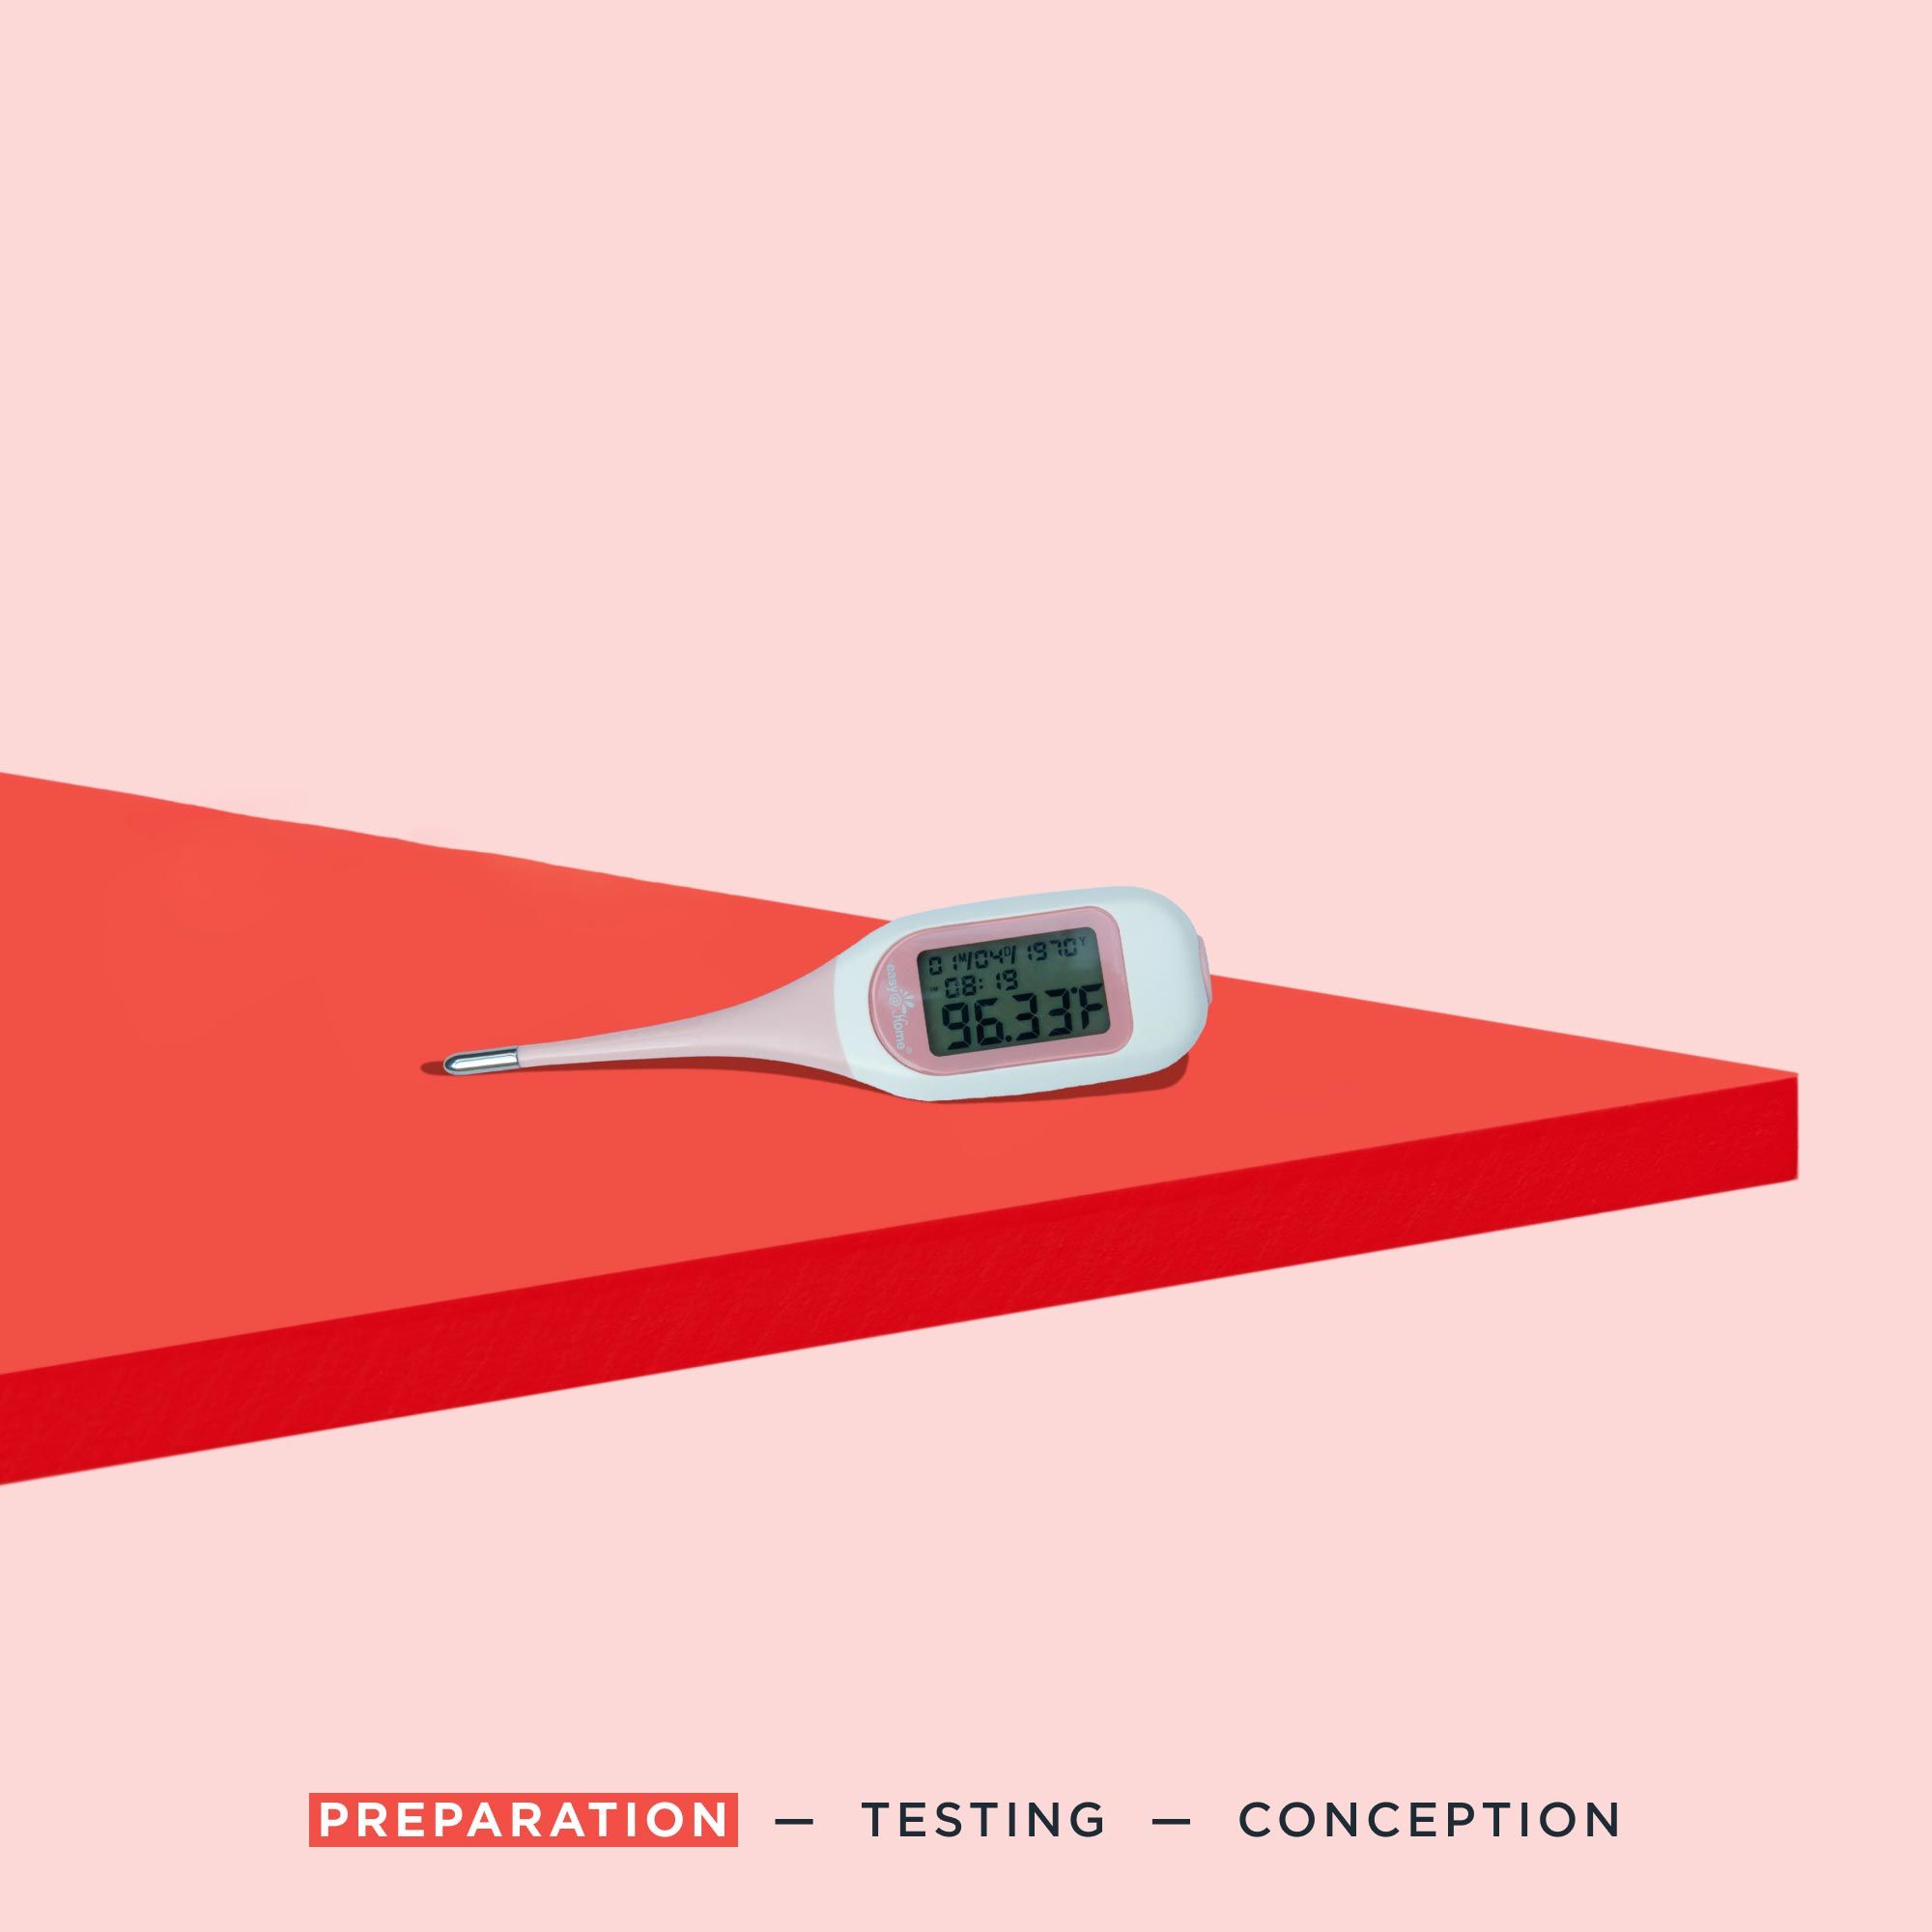 A pink fertility thermometer on a red surface with a pink background